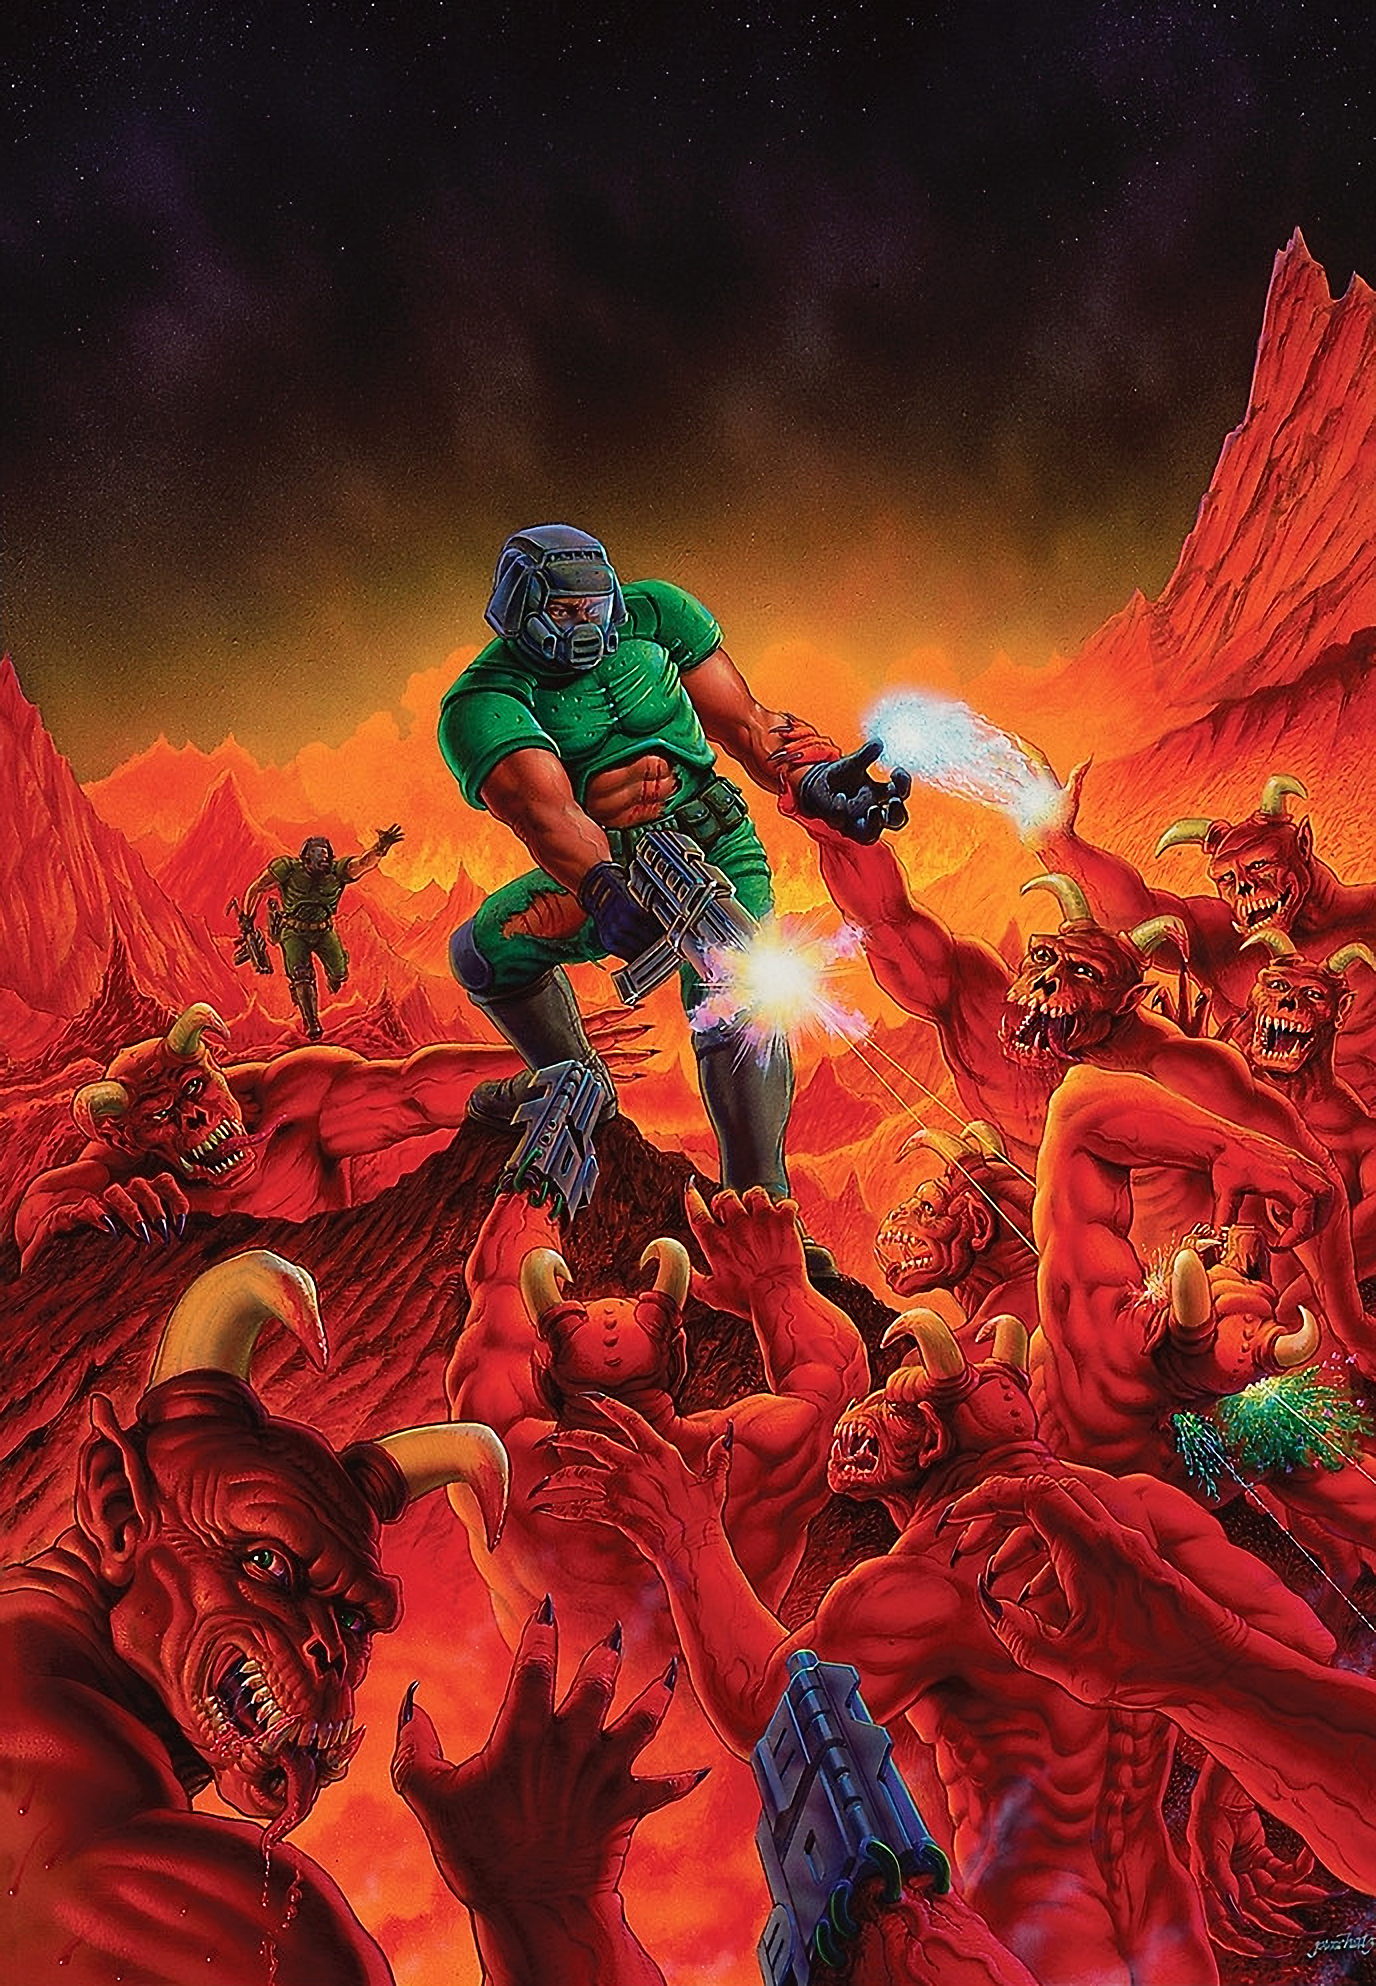 Rip and Tear: How Doom Changed the Gaming Landscape